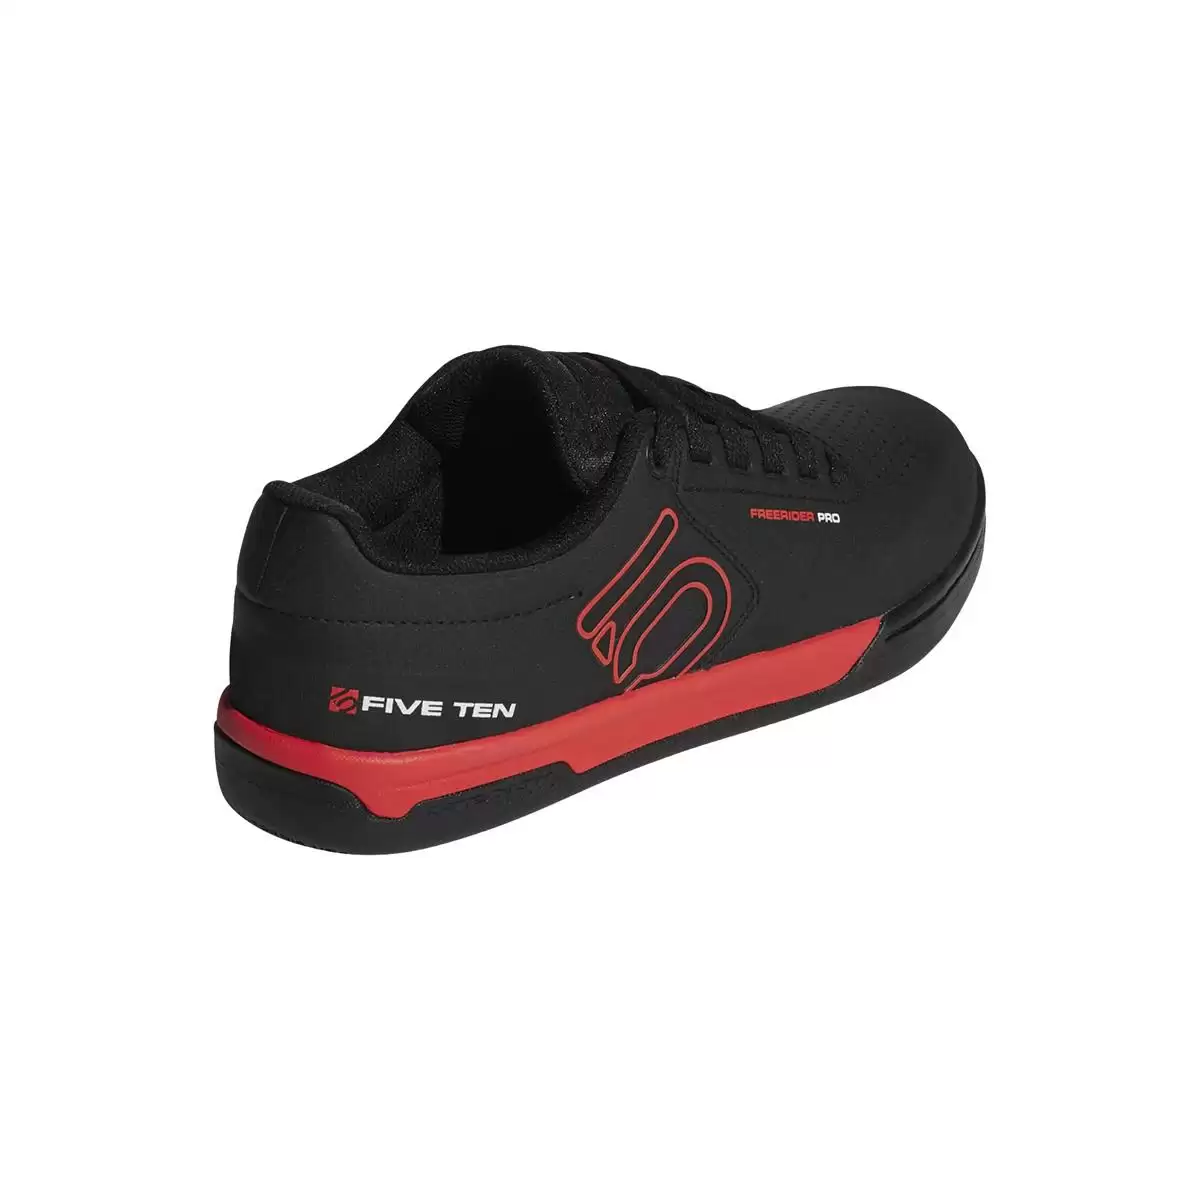 MTB Flat Shoes Freerider Pro Black/Red Size 46,5 #2